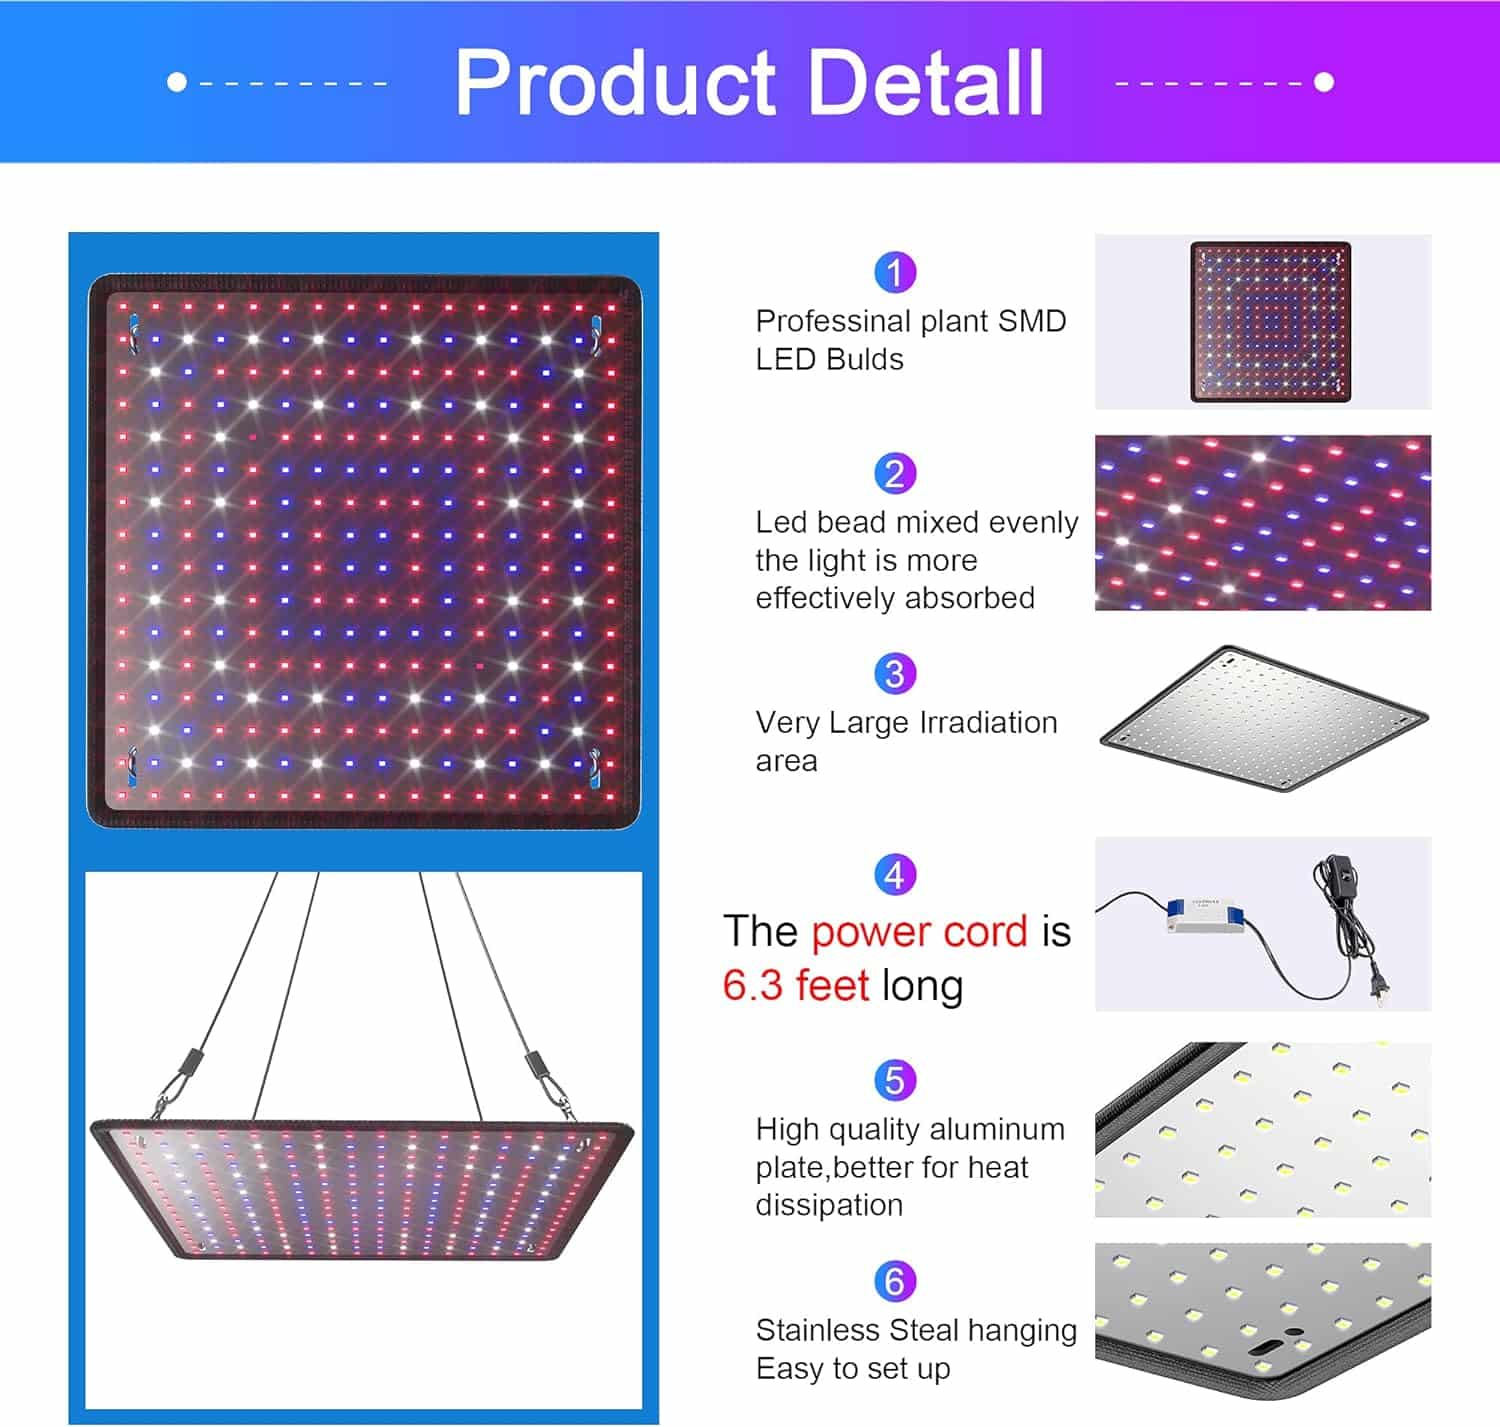 Uallhome 2 Pack LED Grow Light Panel 200W Lamp for Indoor Plants, Full Spectrum with White Blue Red UV IR LEDs for 4x4ft Coverage Grow Tent Greenhouse Veg and Bloom Seedlings Hydroponics